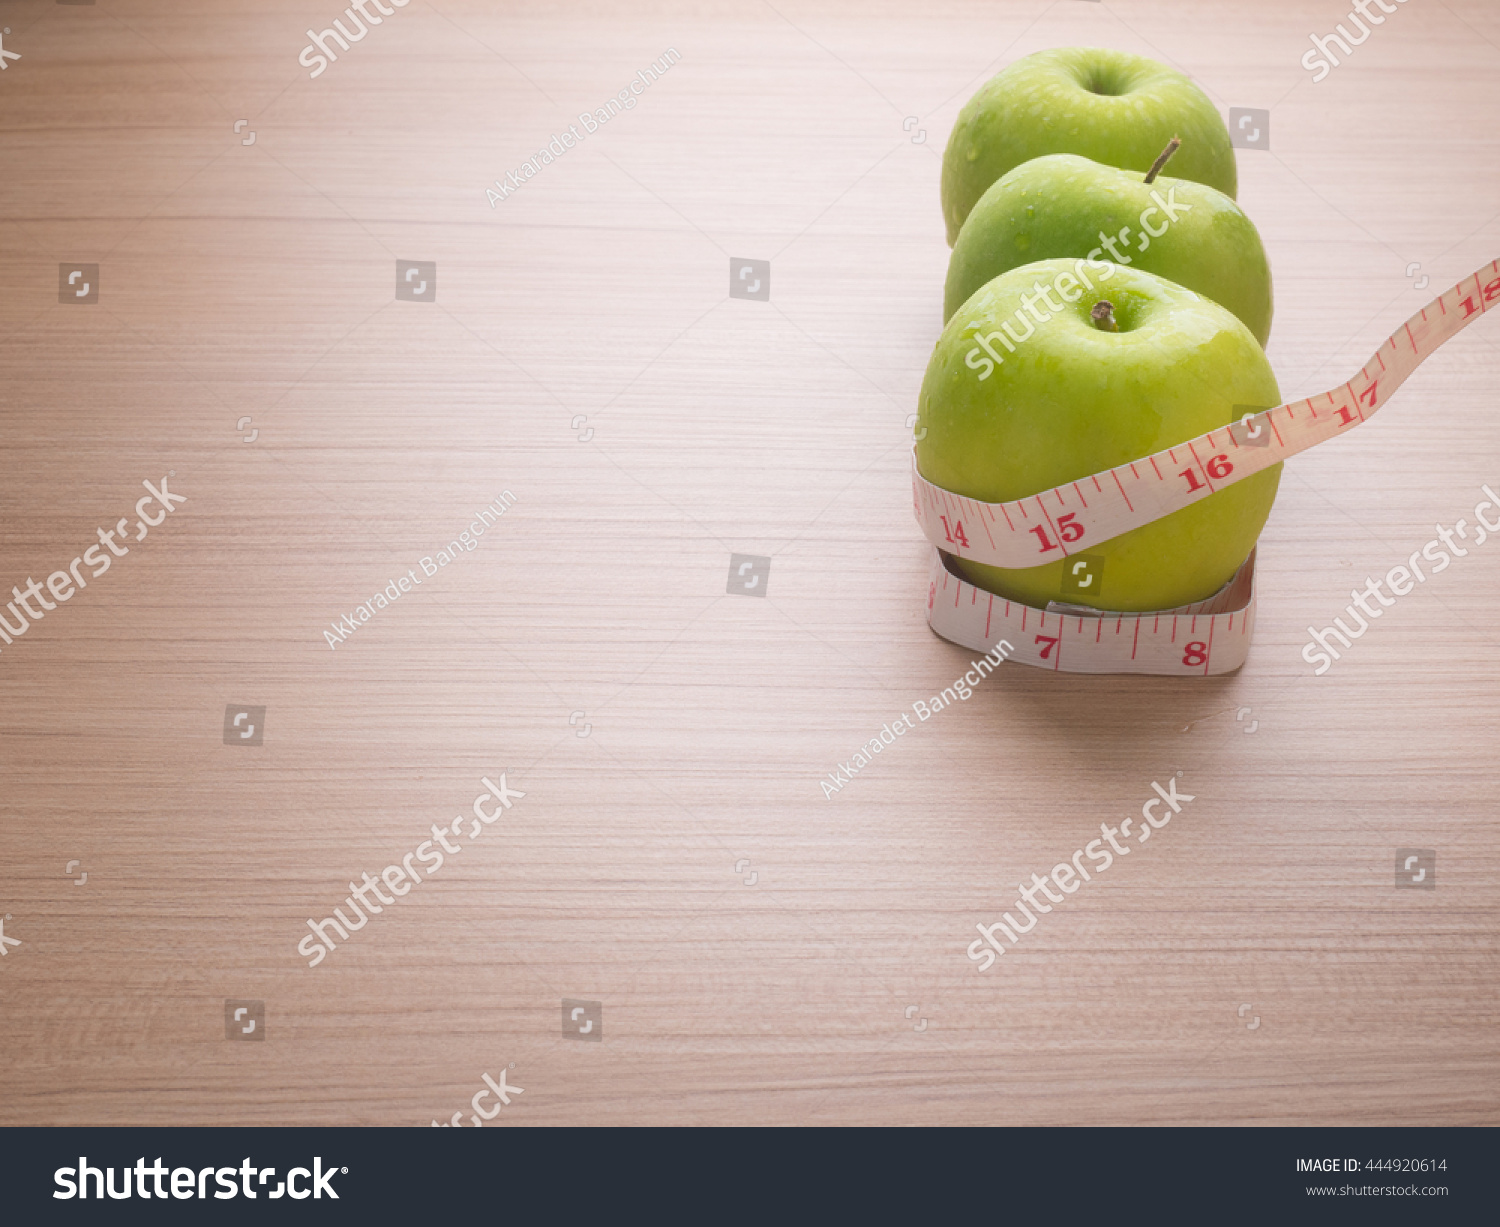 Apples with tape measure on brown wood background, lose weight concept #444920614